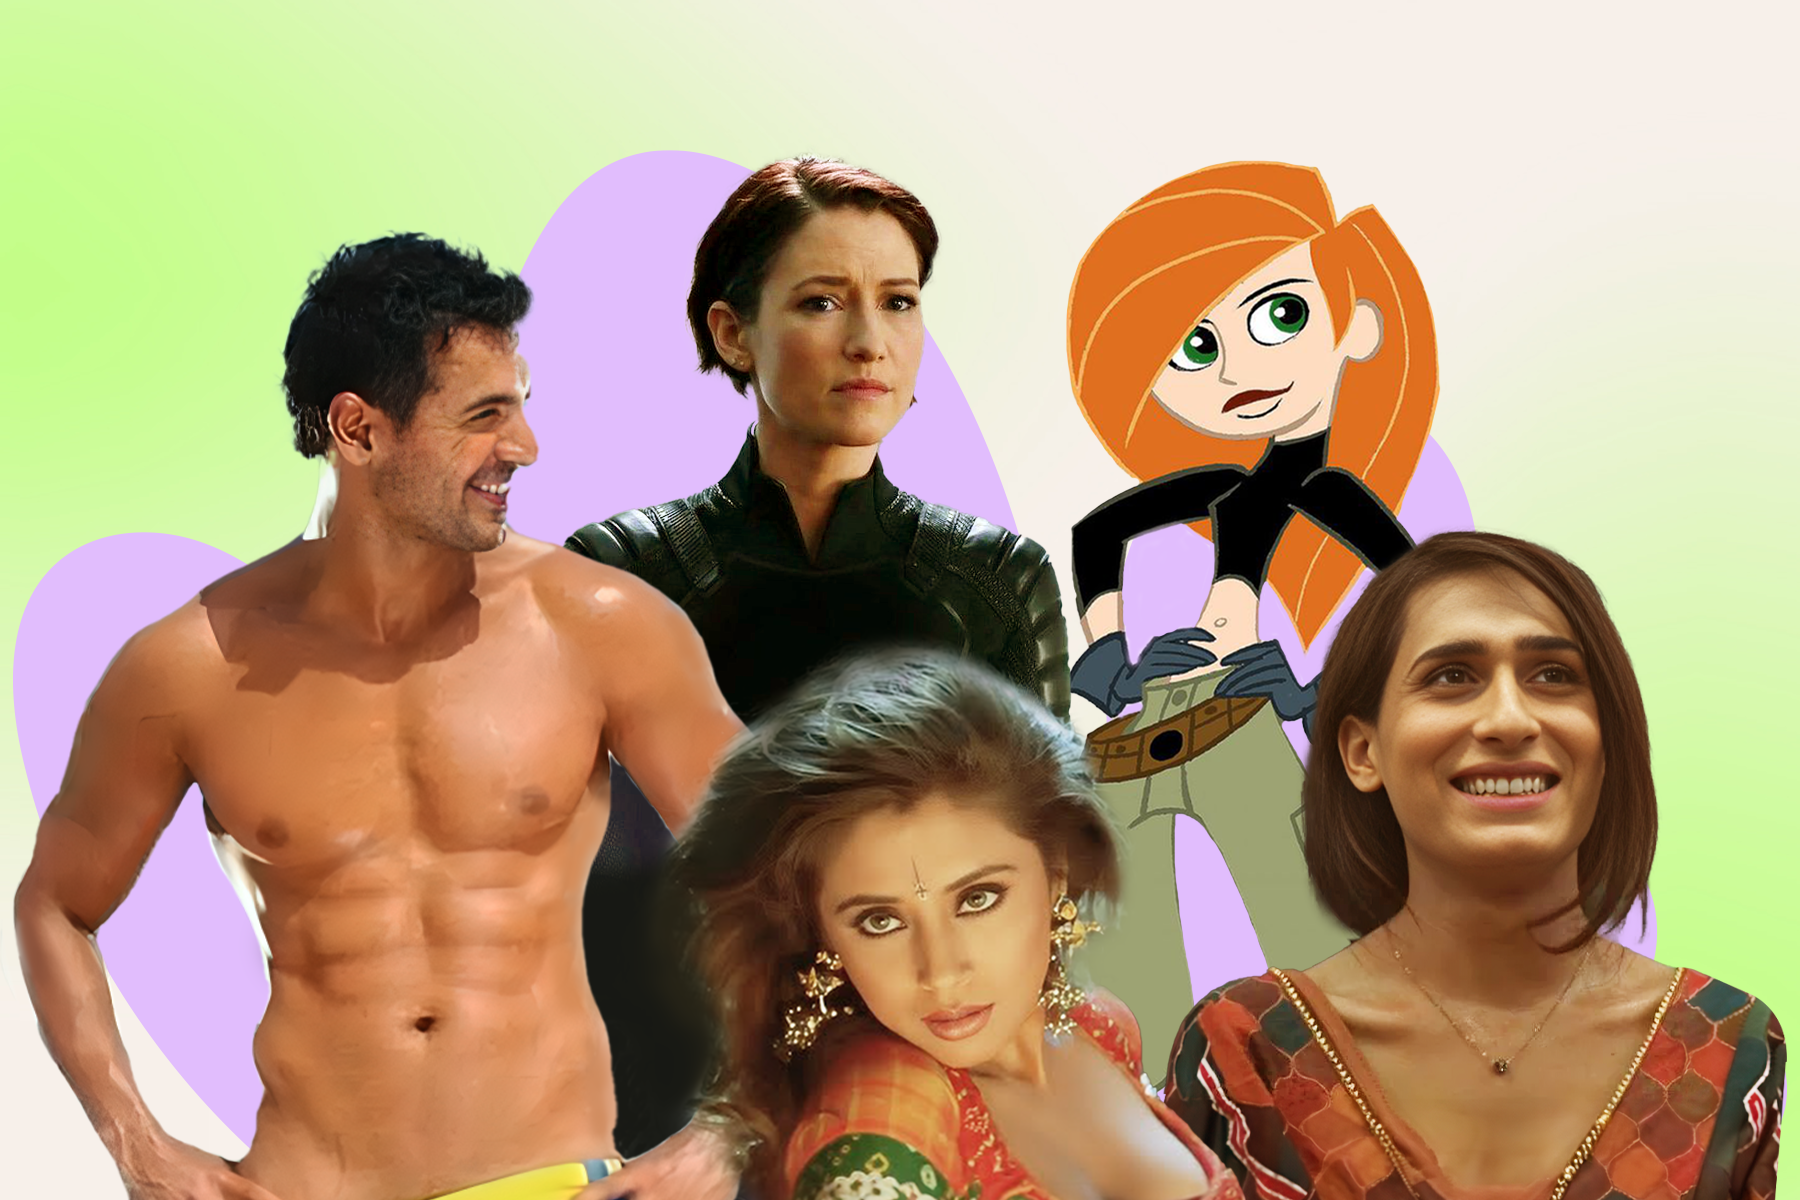 6 people Share Fictional Characters Responsible for their Sexual Awakening